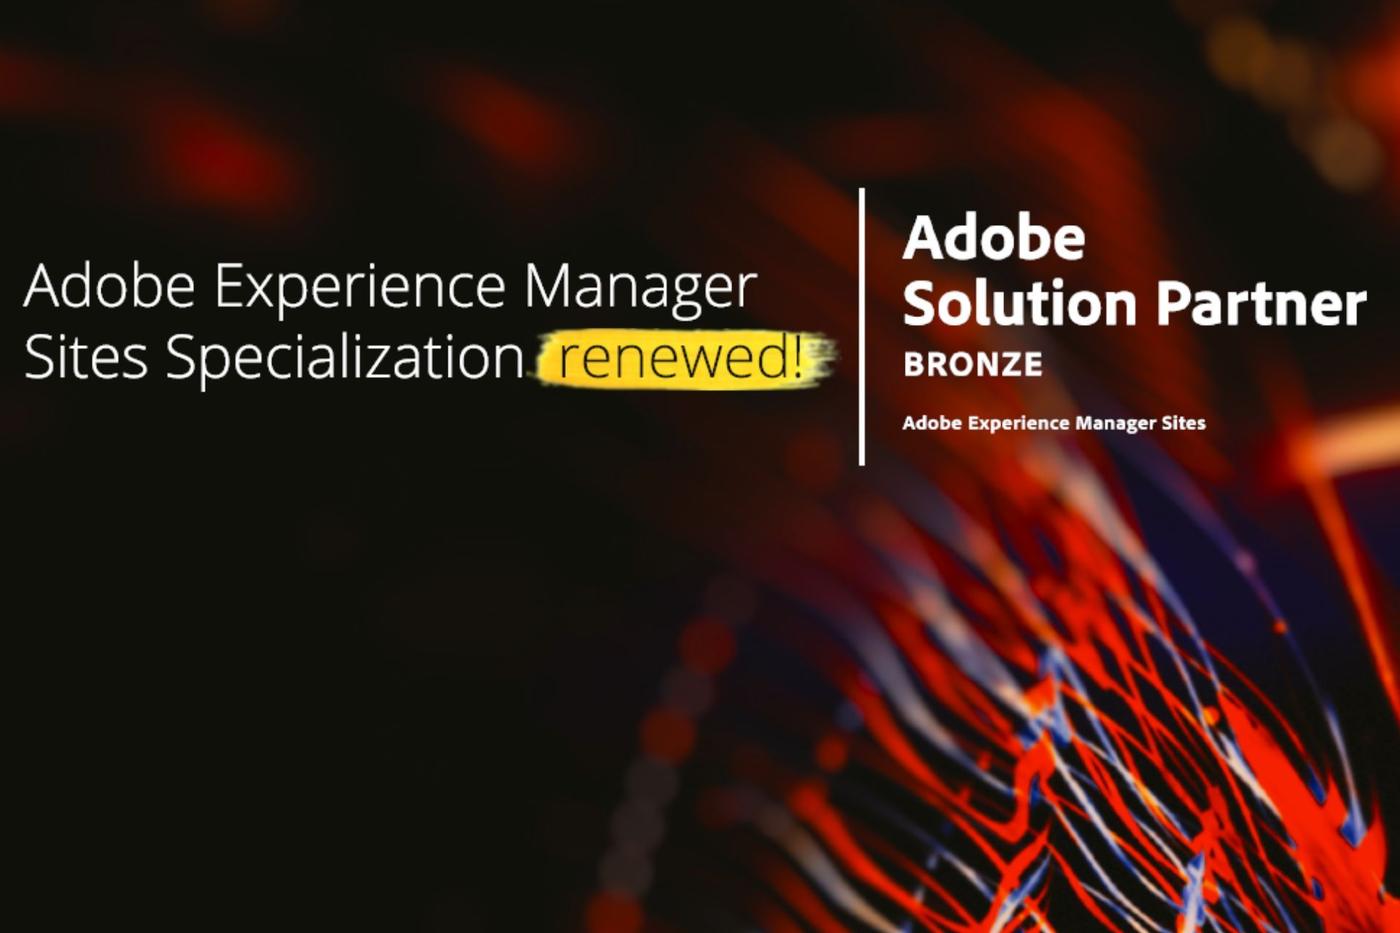 Initialyze-obtains-the-adobe-experience-manager-sites-specialization.jpg